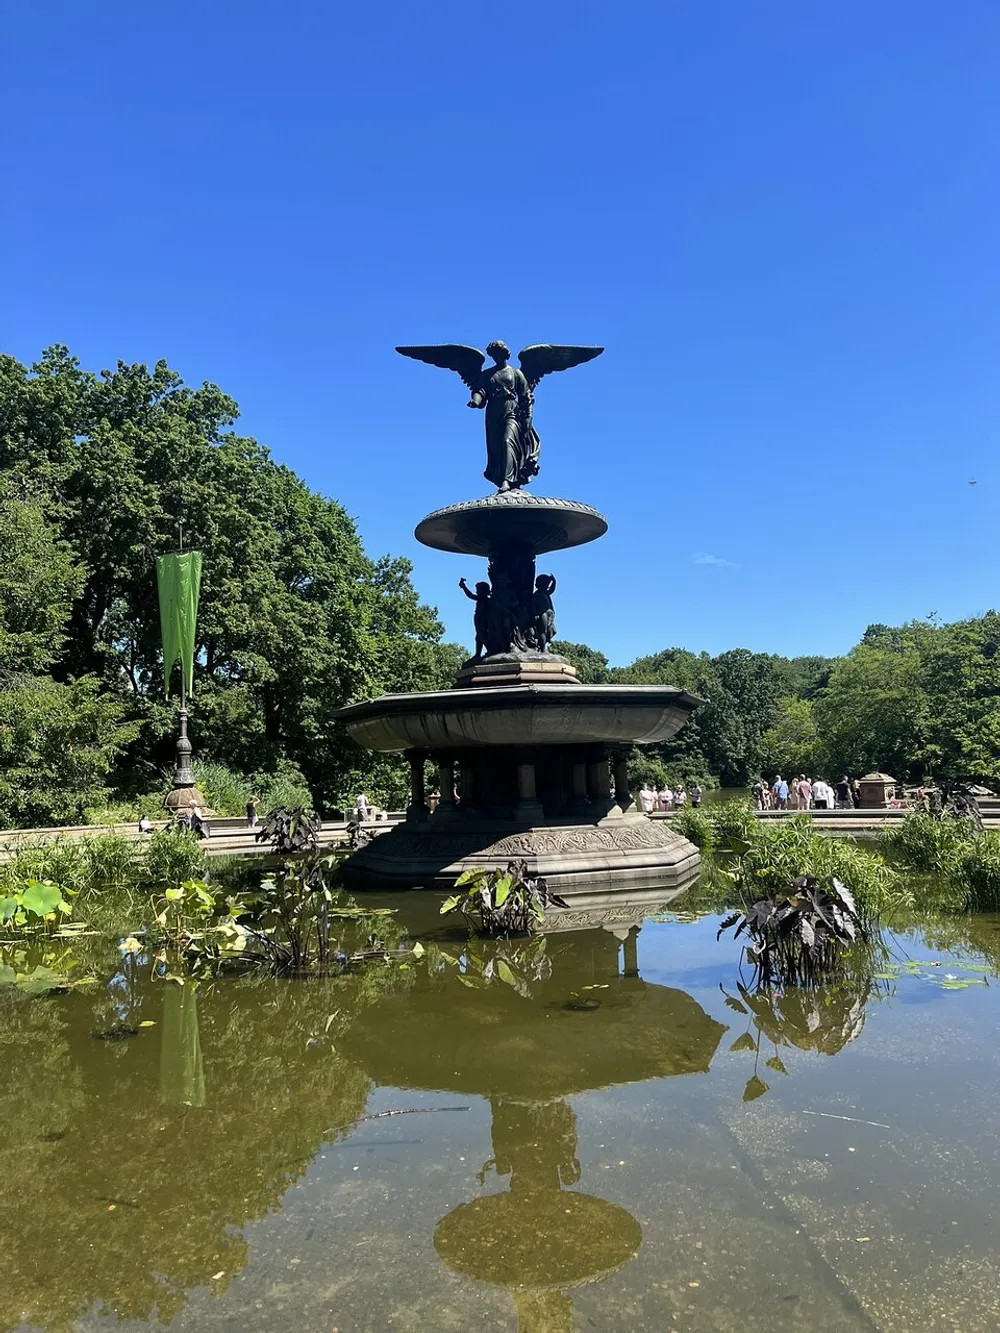 A fountain with an angel statue stands in the center of a pond surrounded by greenery under a clear blue sky